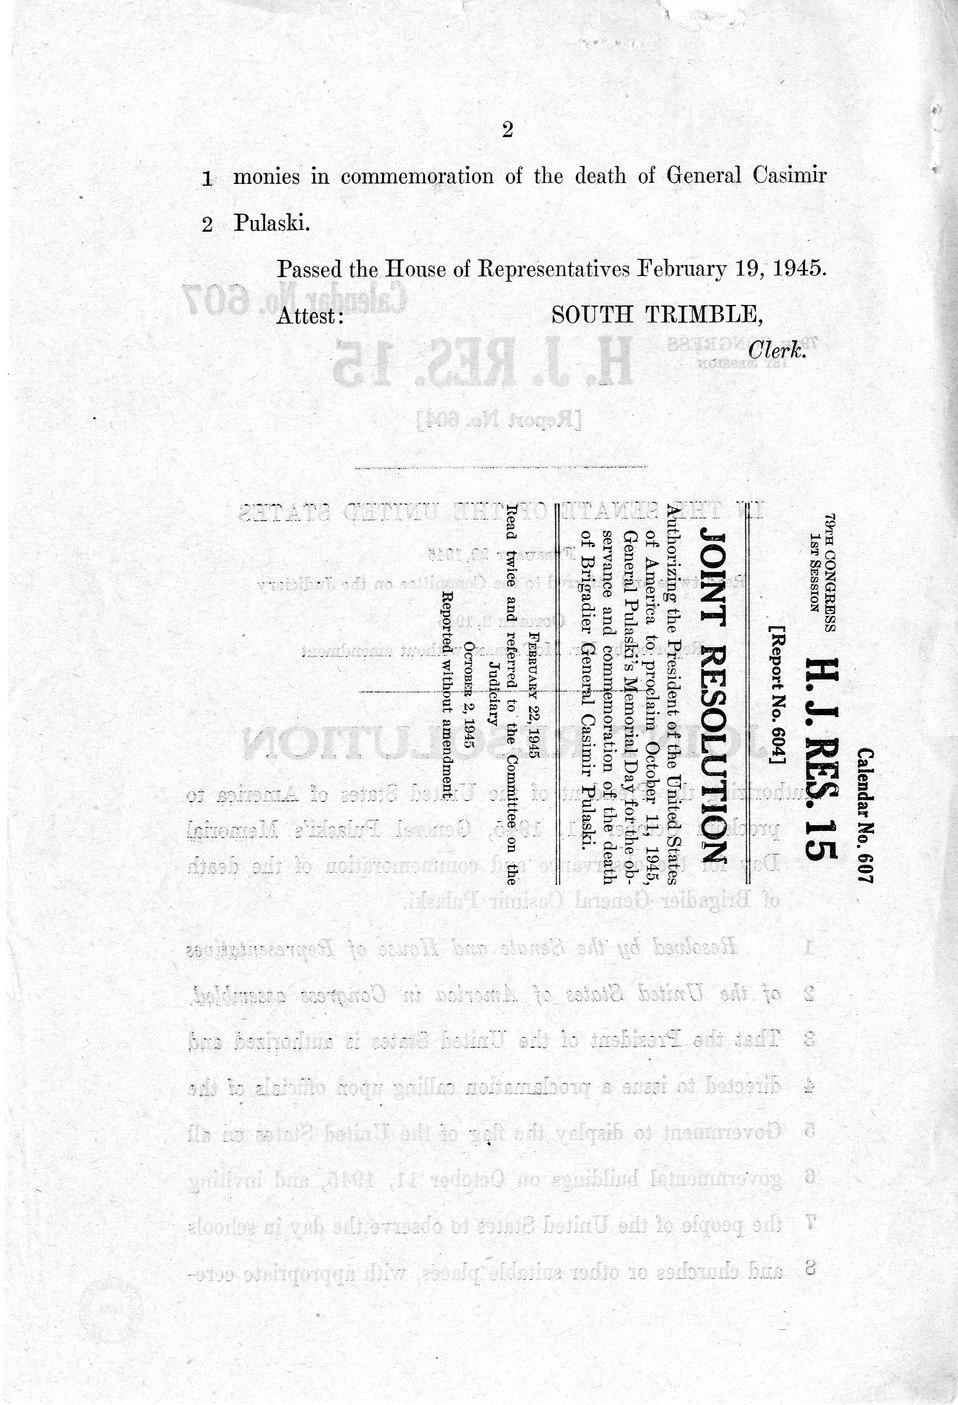 Memorandum from Frederick J. Bailey to M. C. Latta, H.J. Res. 15, Authorizing the President of the United States of America to Proclaim October 11, 1945, General Pulaski's Memorial Day for the Observance and Commemoration of the Death of Brigadier General